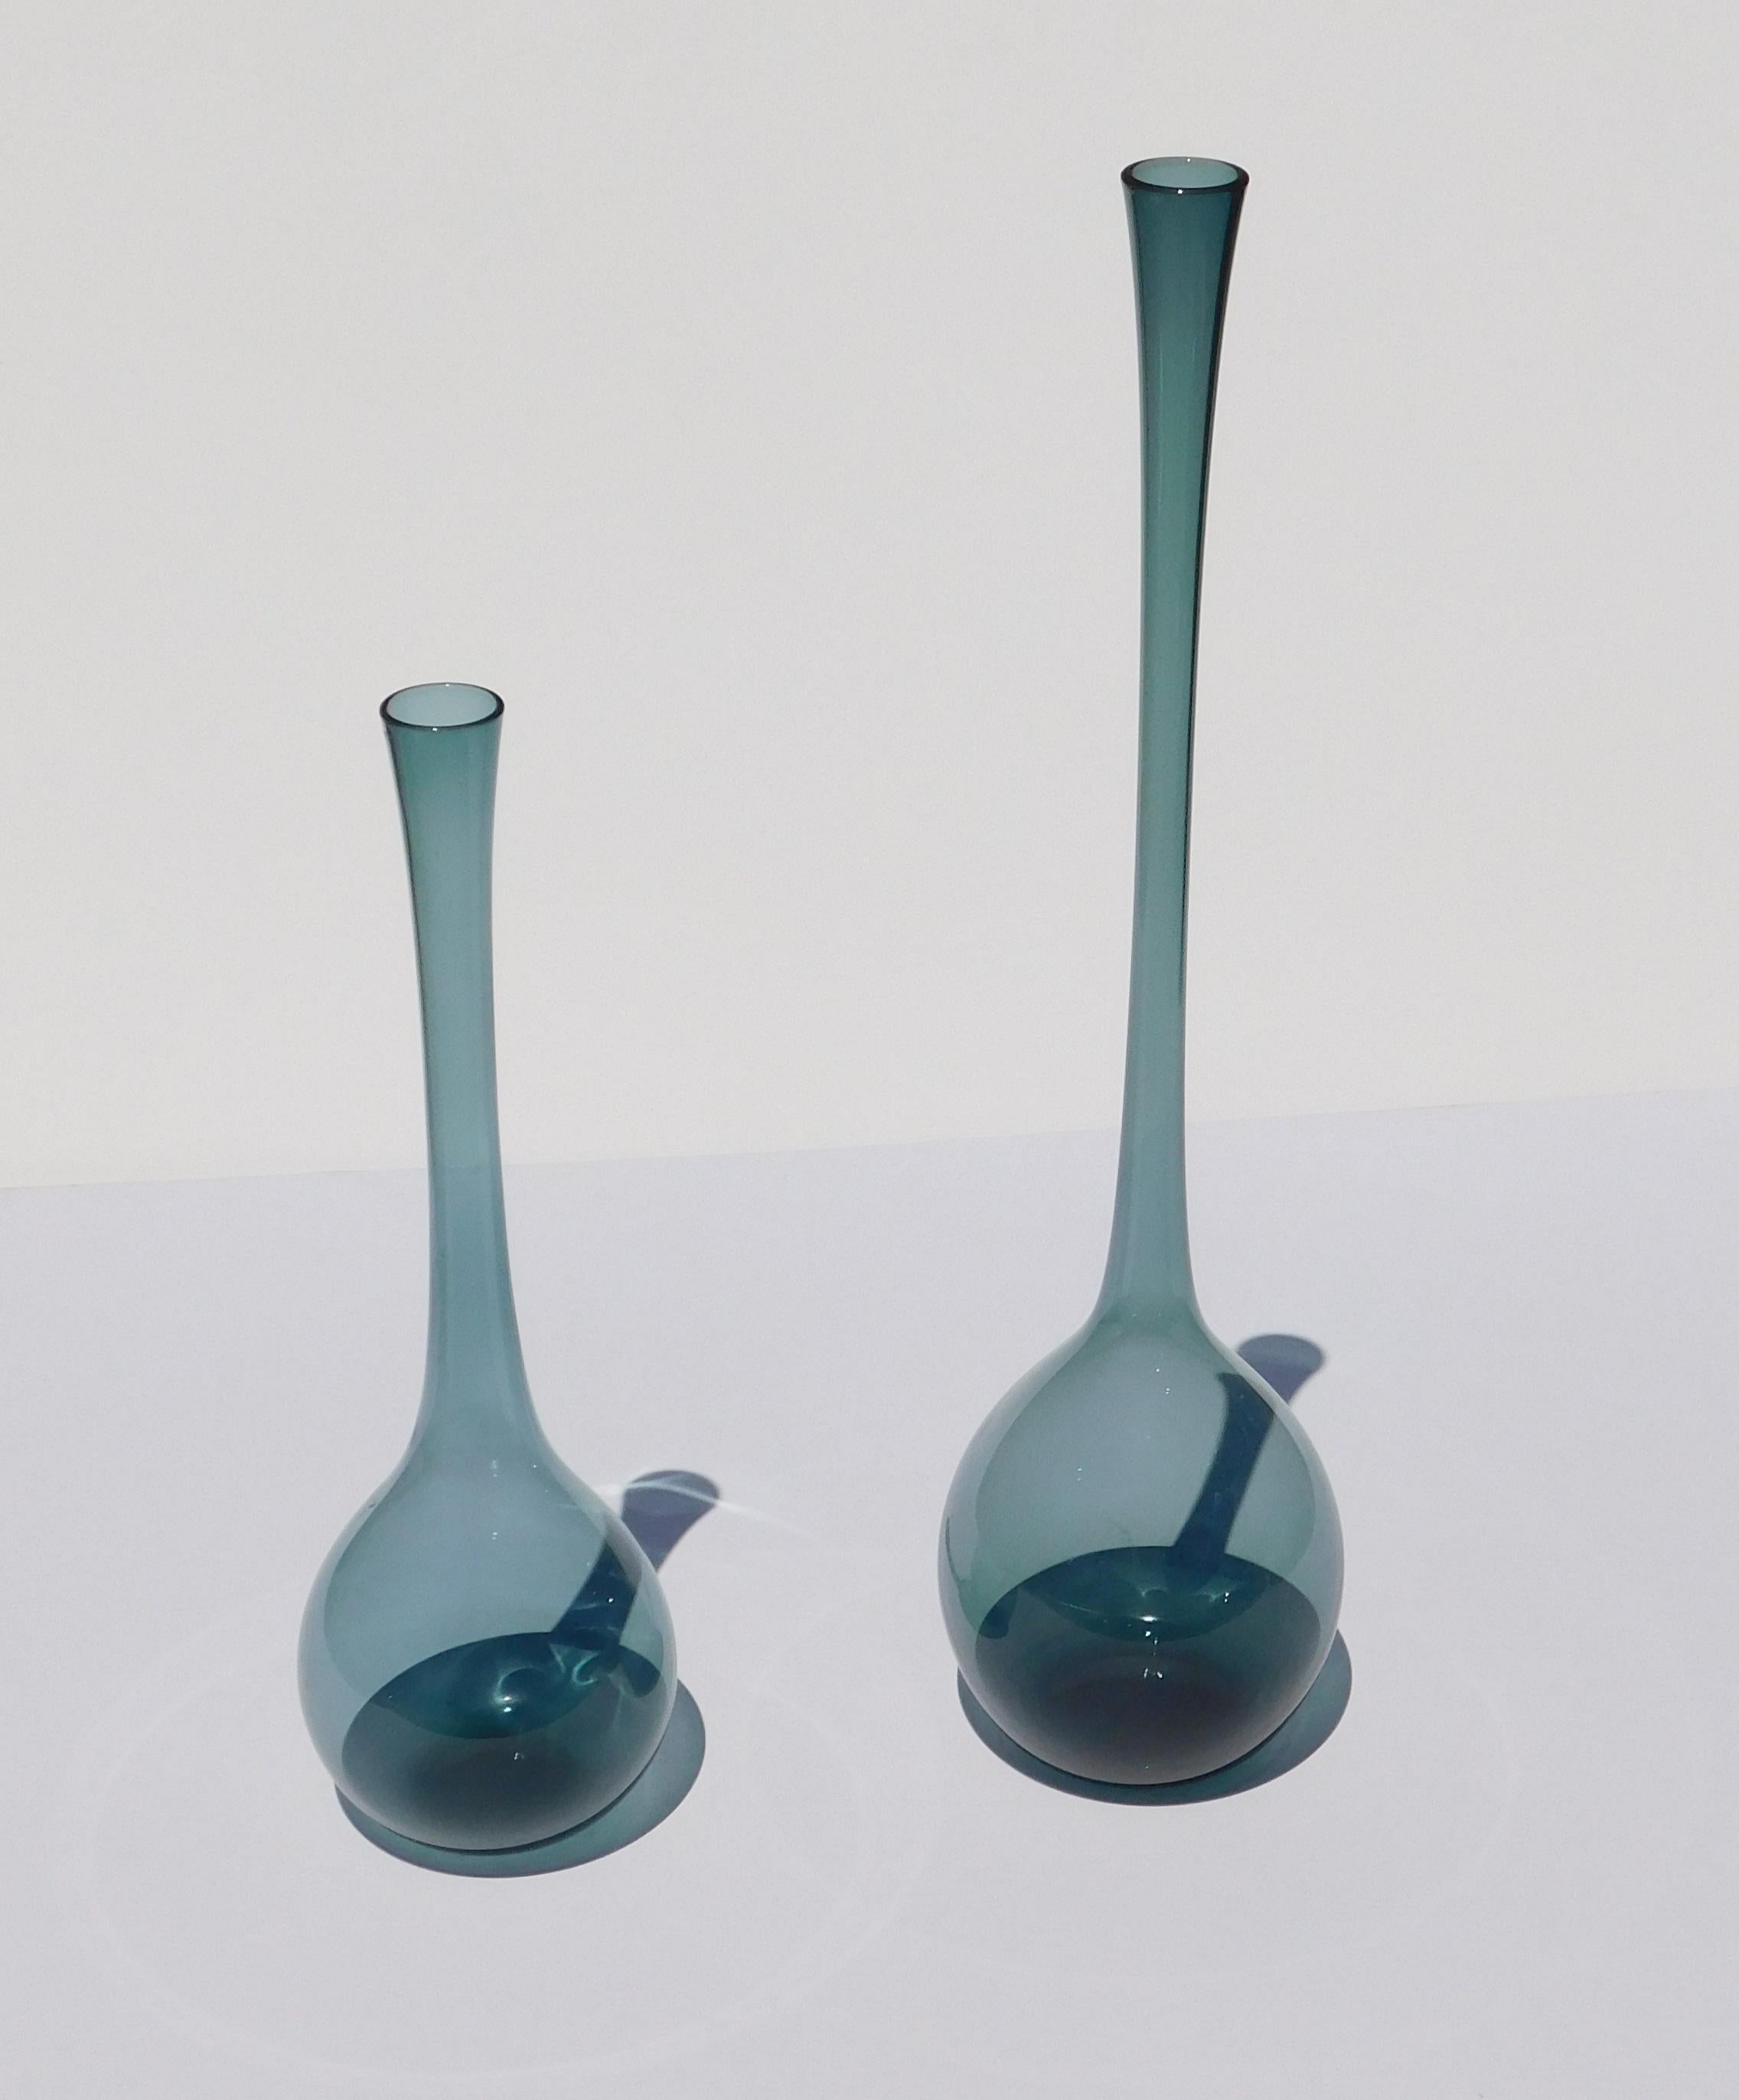 Set of two art glass vases most likely by Arthur Percy for Gullaskruf, Sweden, 1950s
Smoky blue color
One measures: 16 5/8